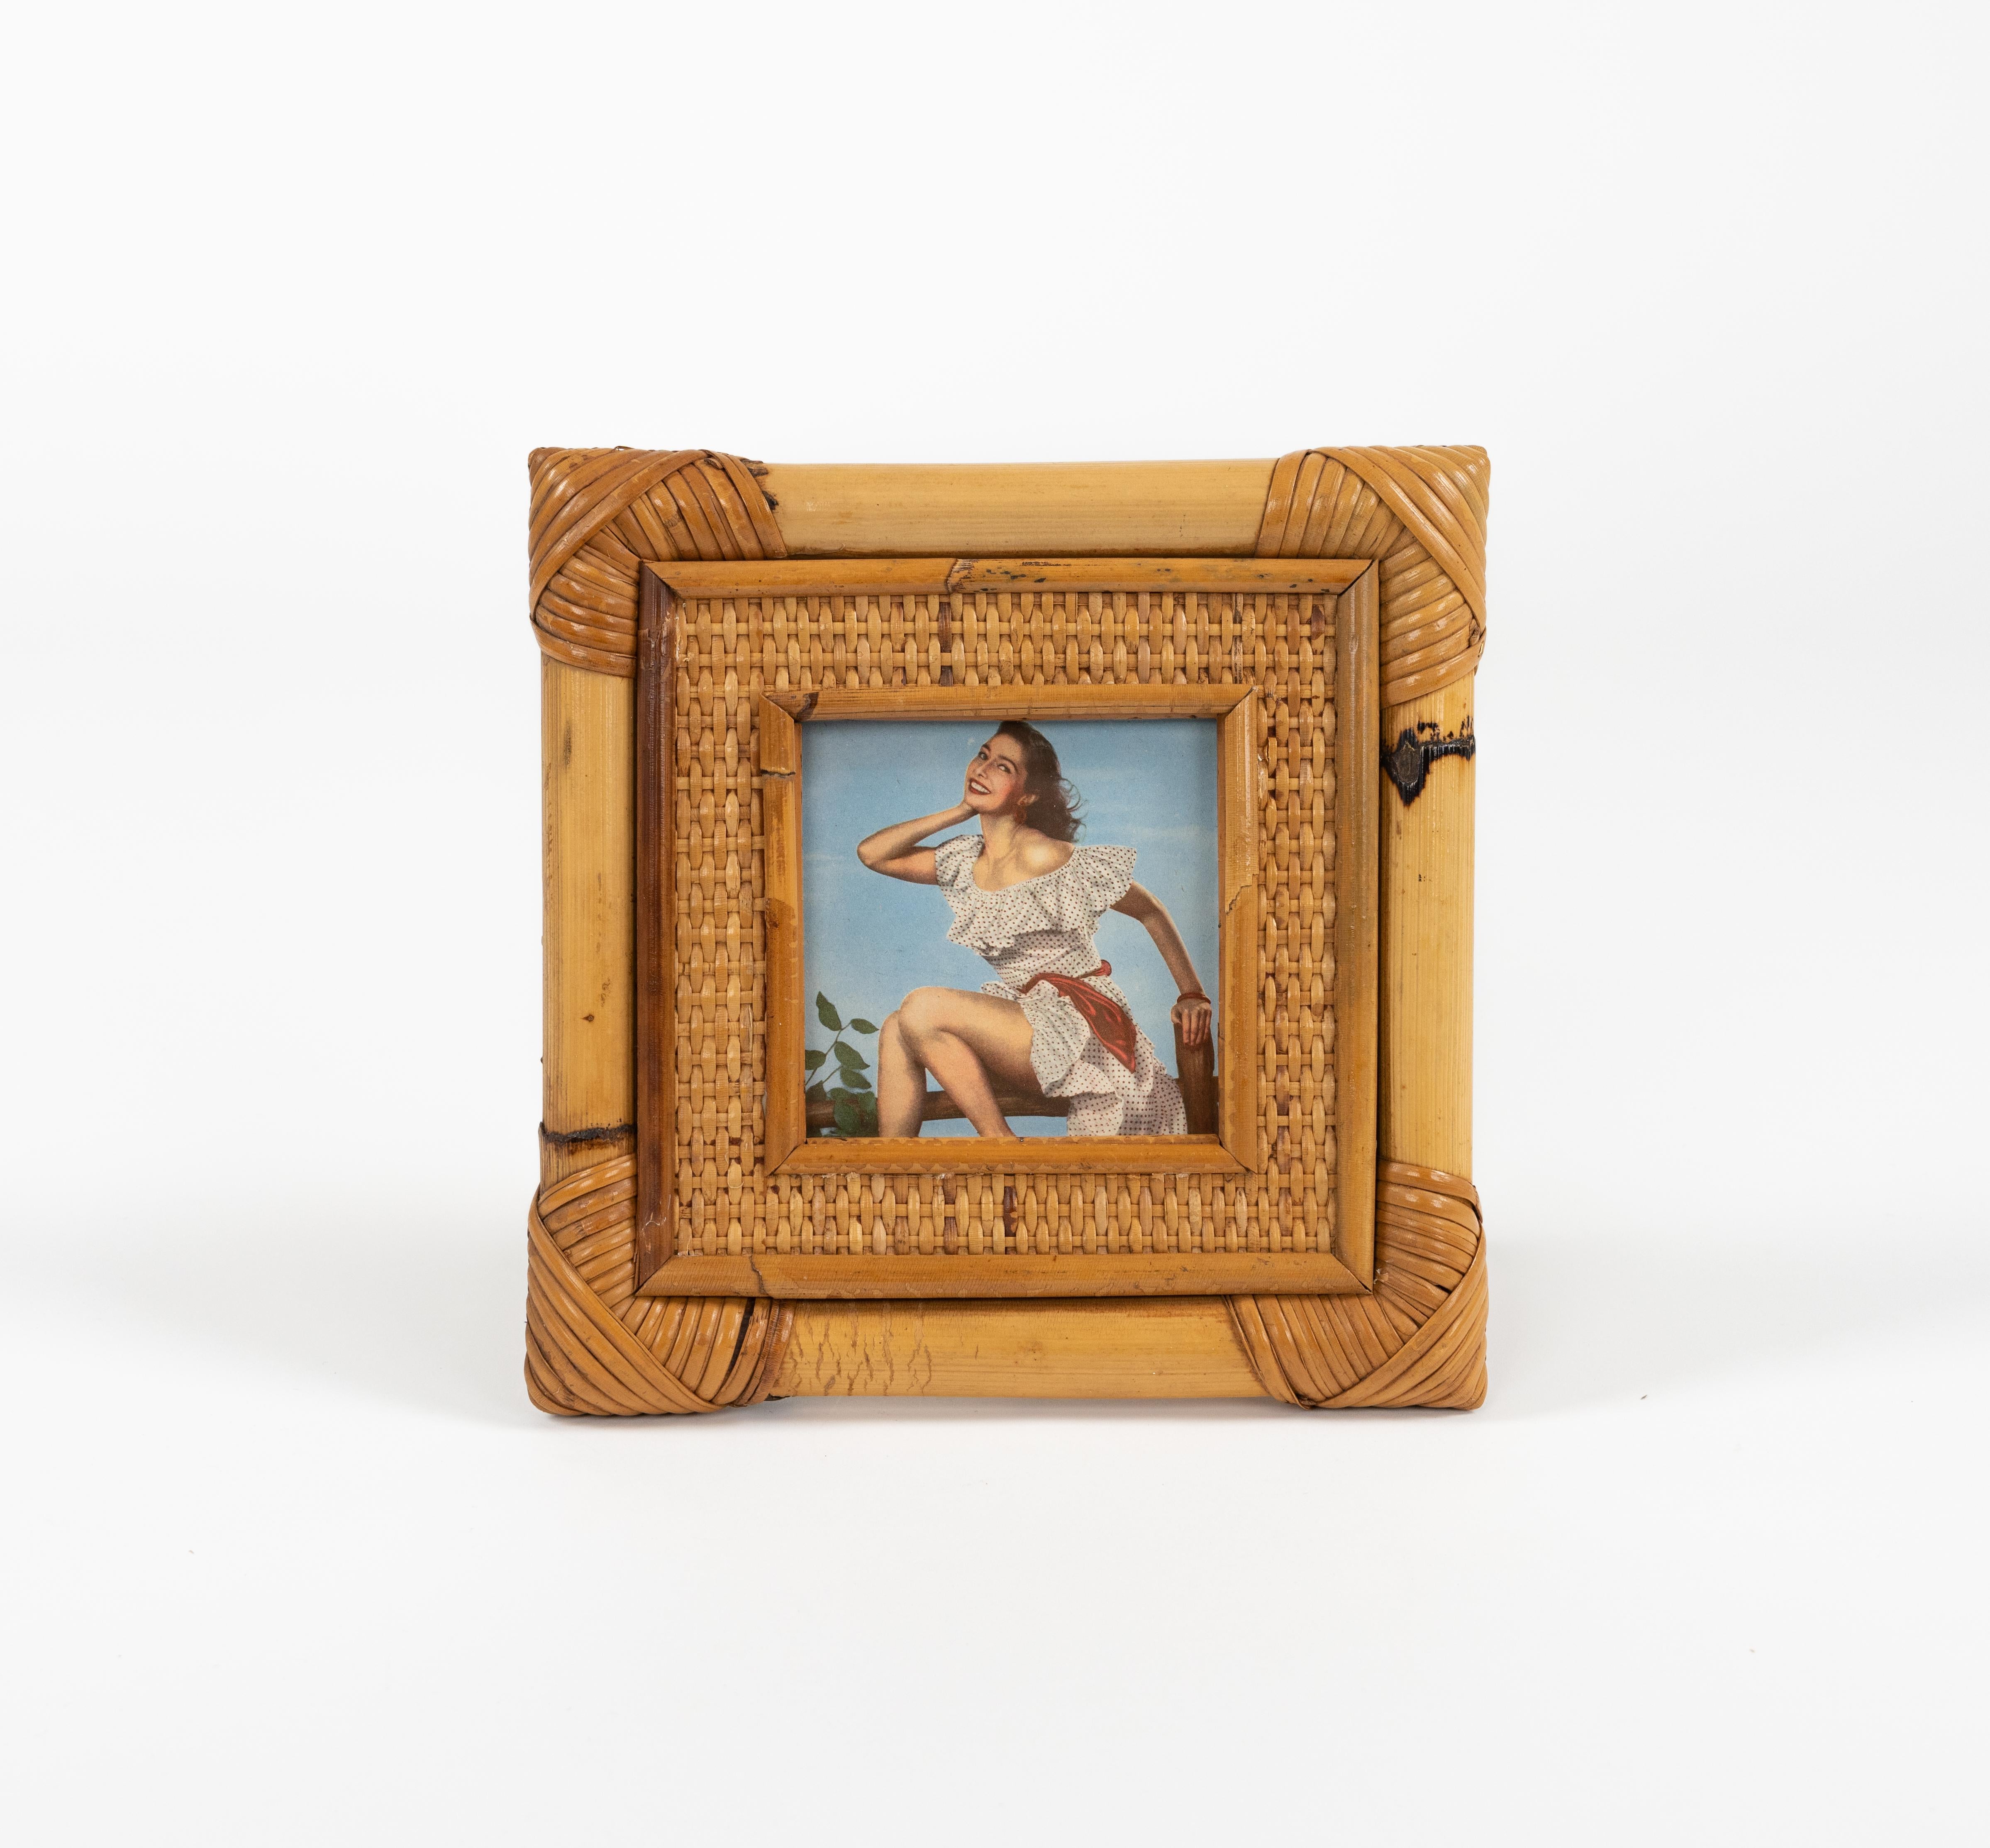 Midcentury beautiful squared picture frame in bamboo, rattan and glass.

Made in Italy in the 1970s.

Perfect desk object or gift idea.